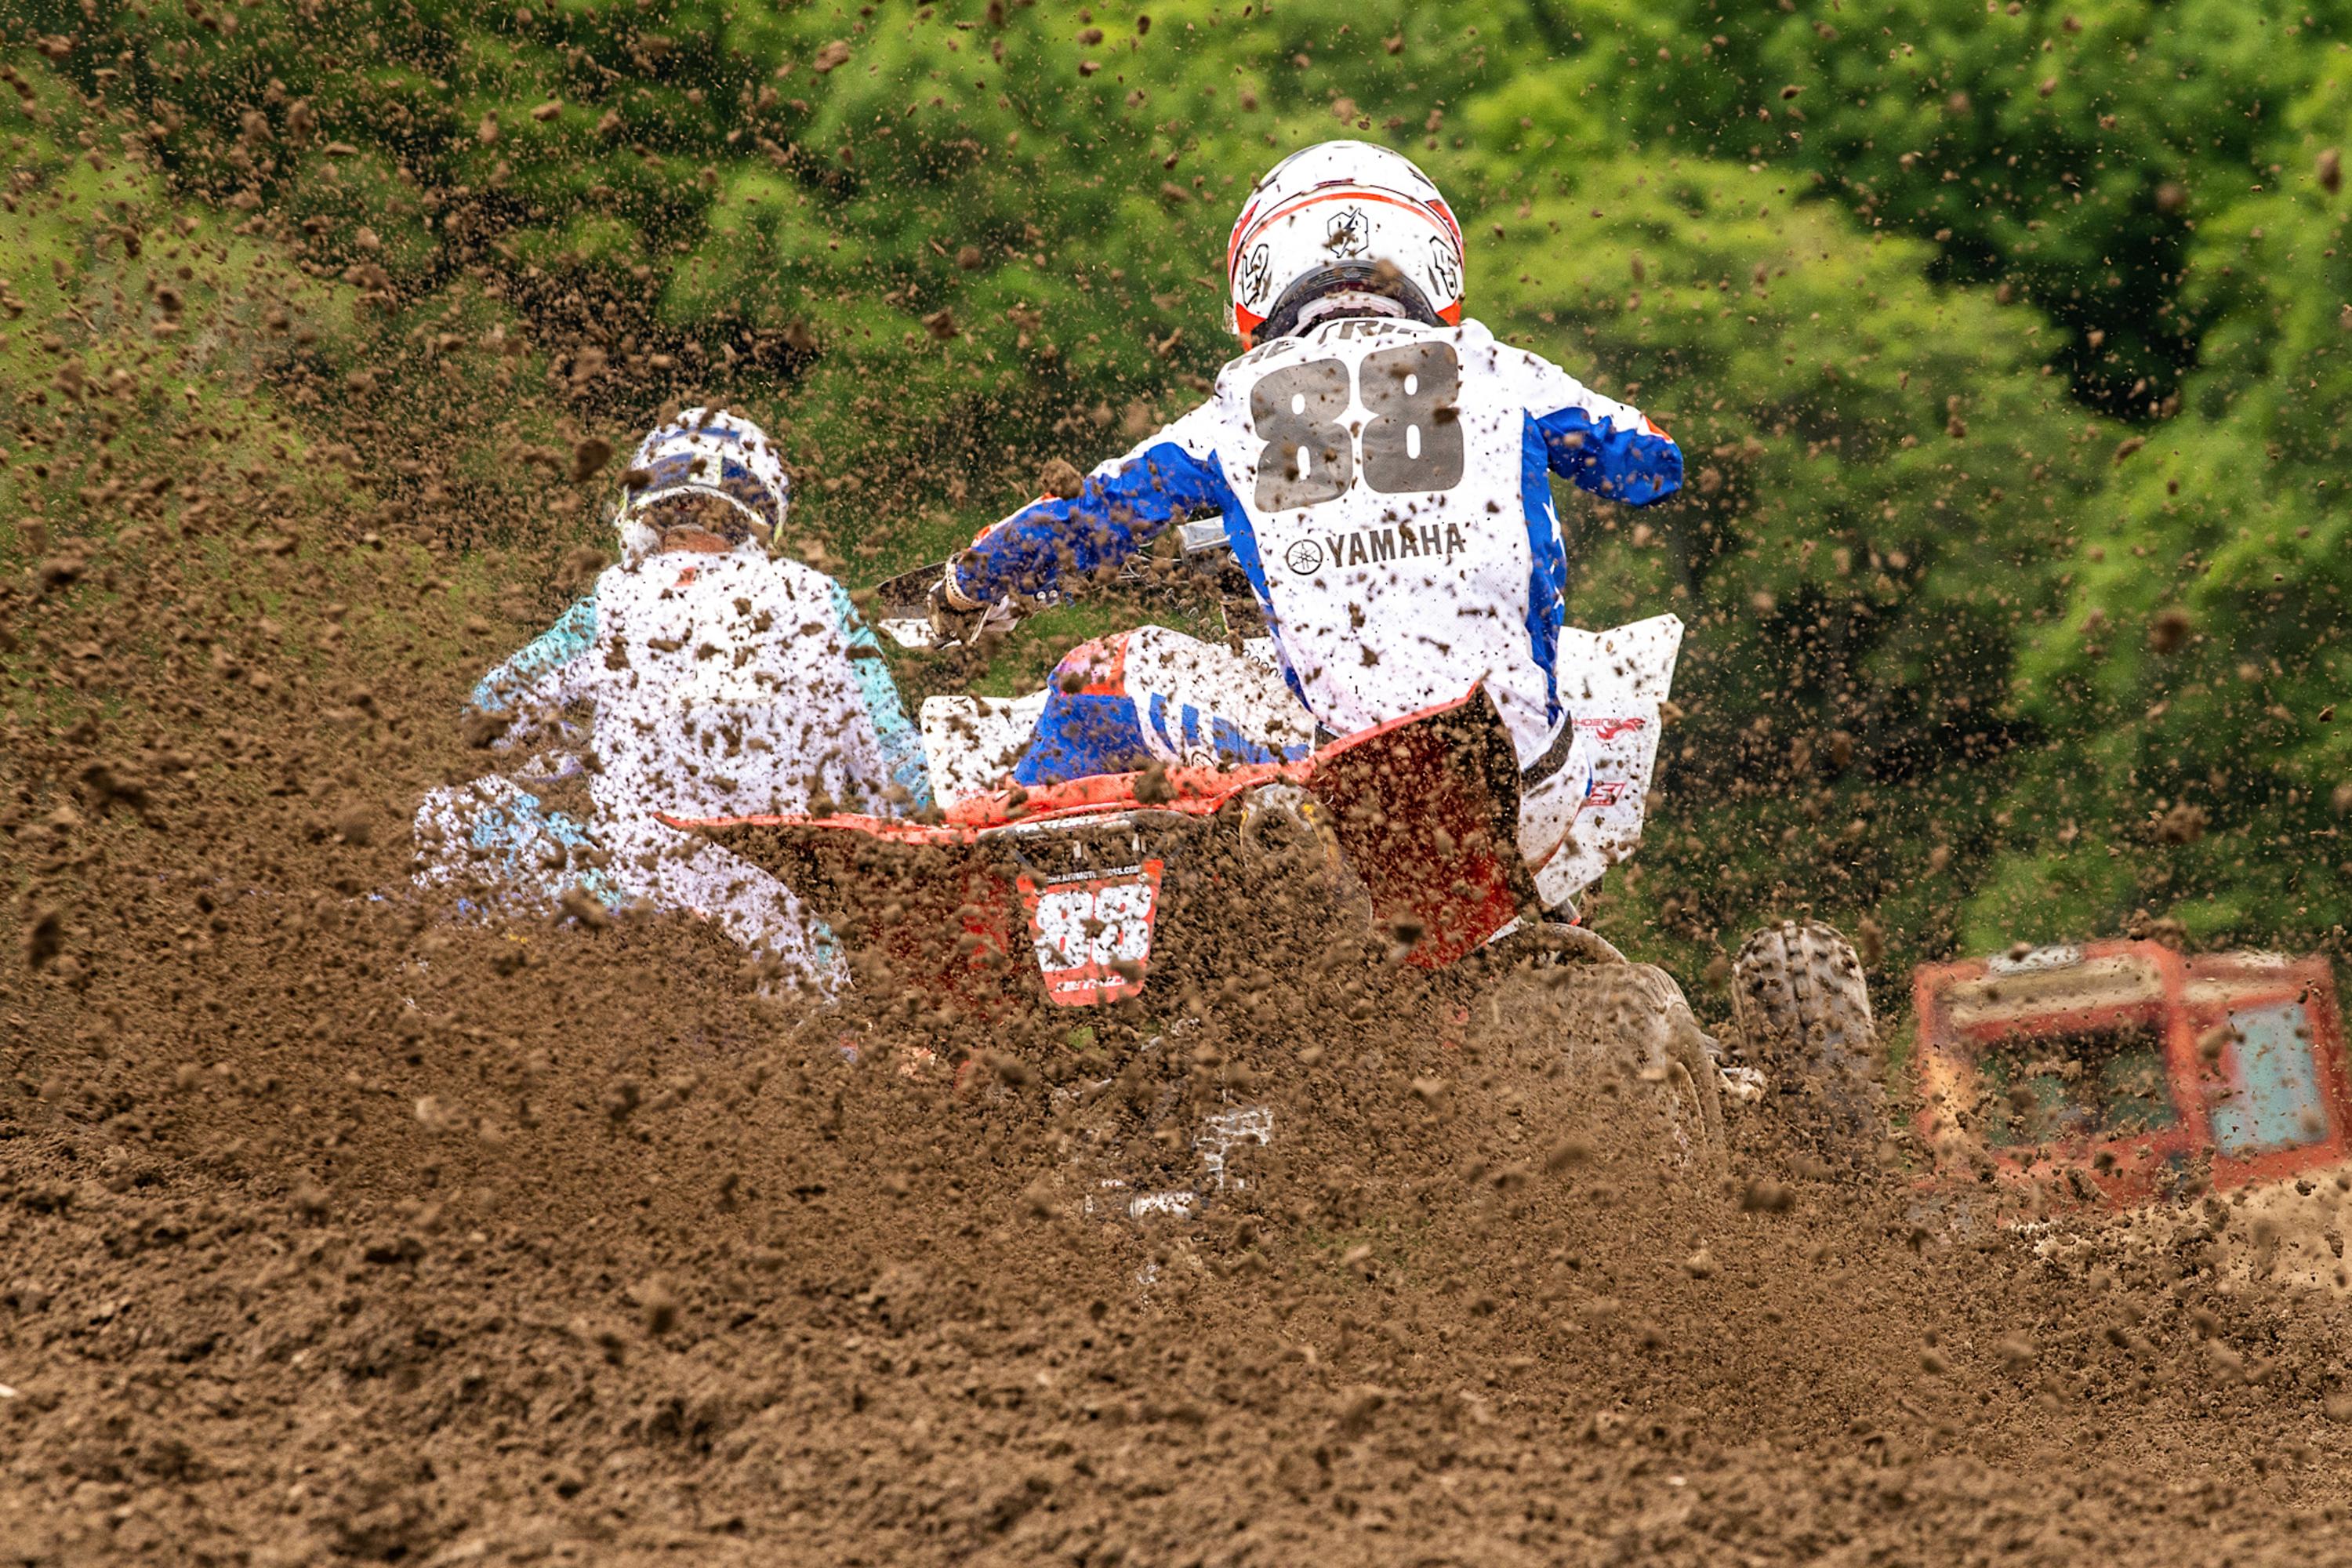 Competition Bulletin 2023-2 Final 2023 ATVMX Series Schedule, Supplemental Rules, National Classes and Orders Now Posted